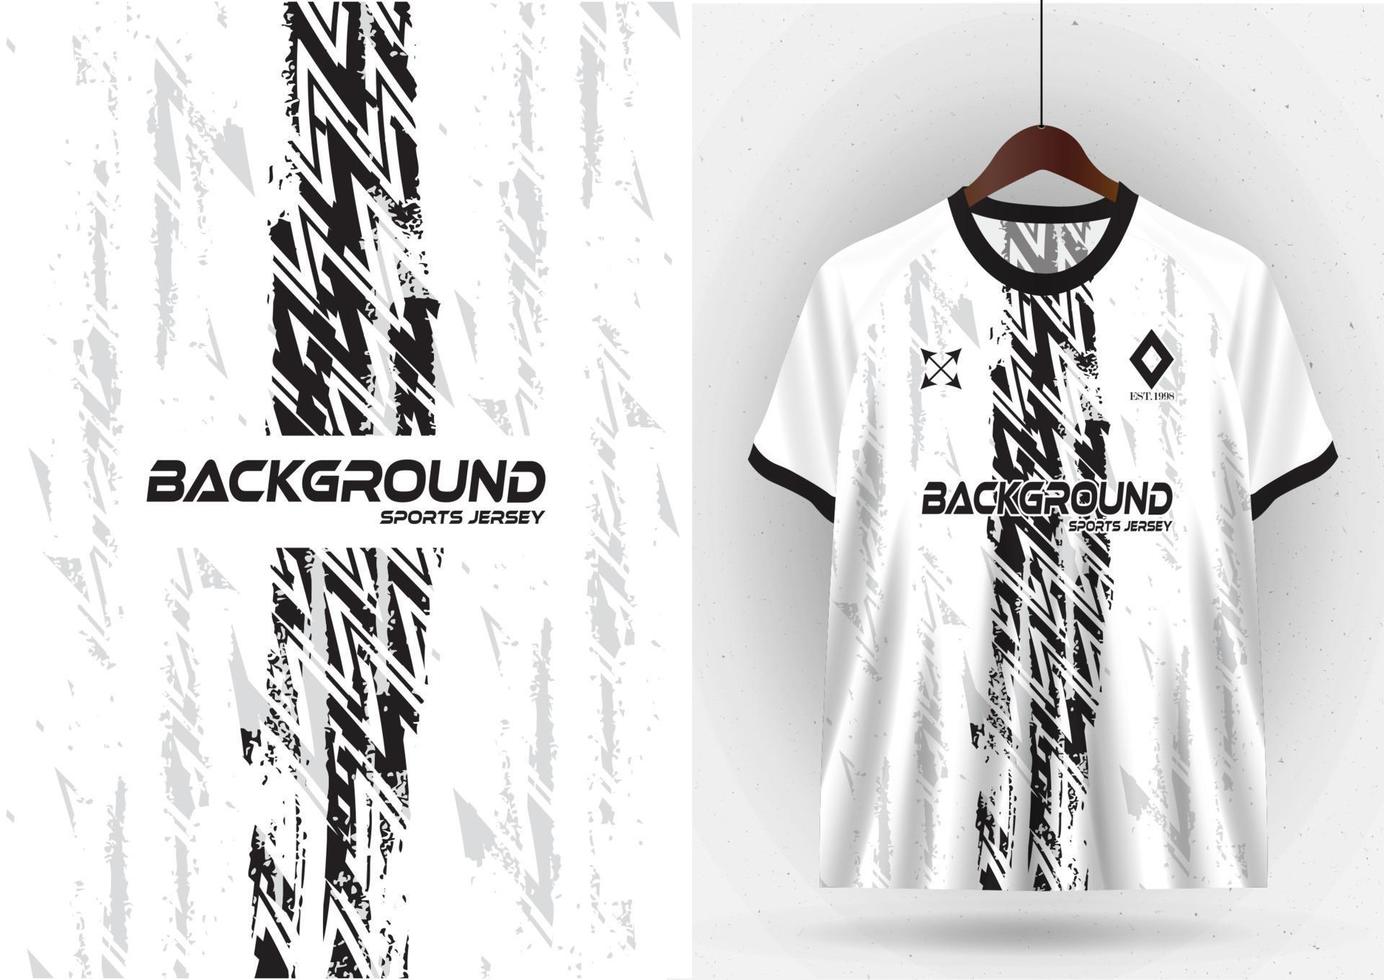 Mockup T-shirt sport design template, soccer jersey mockup for soccer club. Uniform front and back view vector